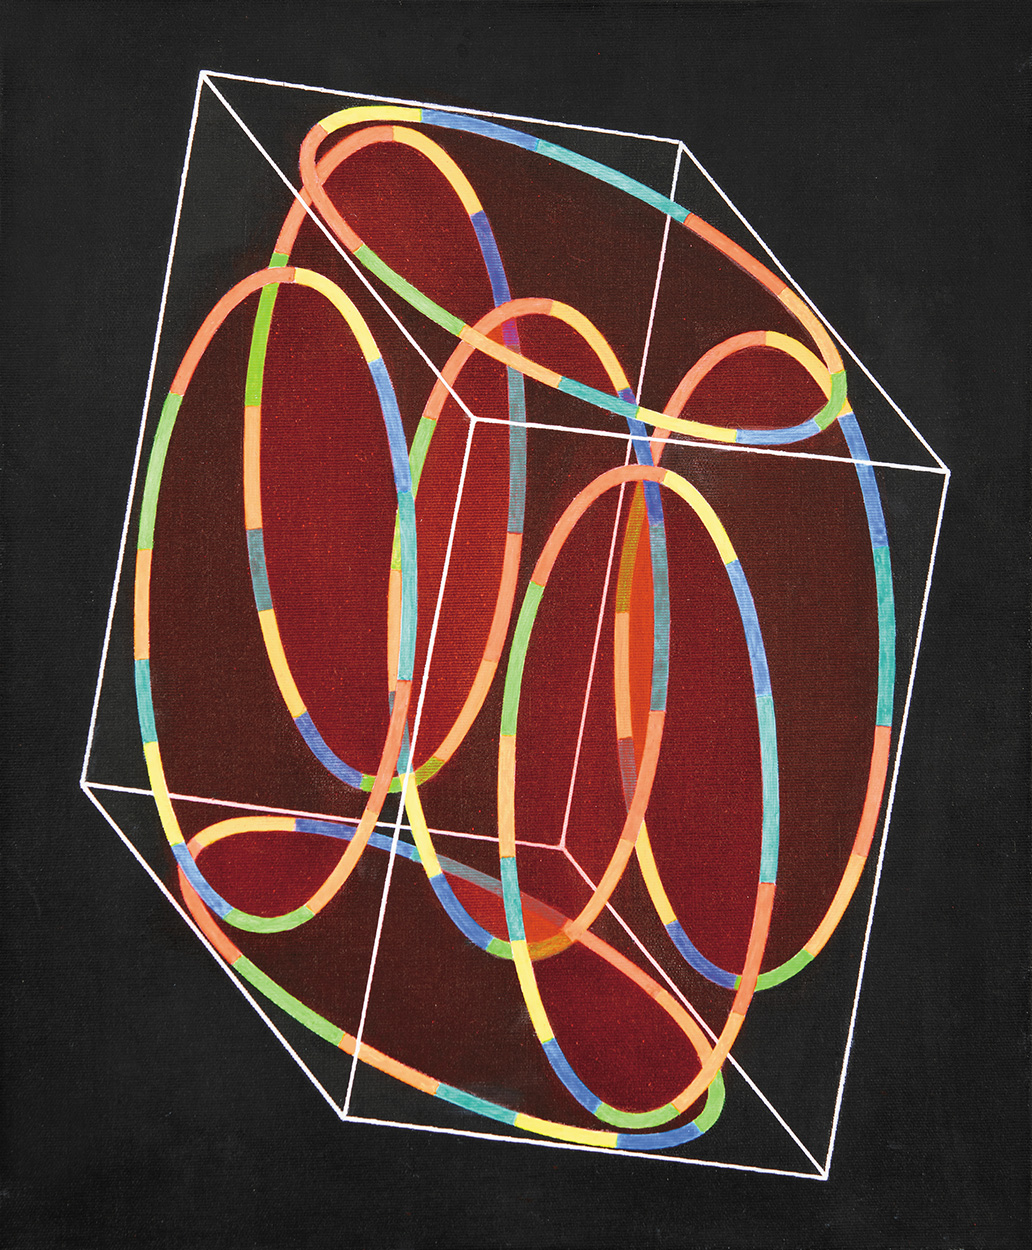 Mengyán András (1945) Simultaneity of a Form in a Specific System, 2019